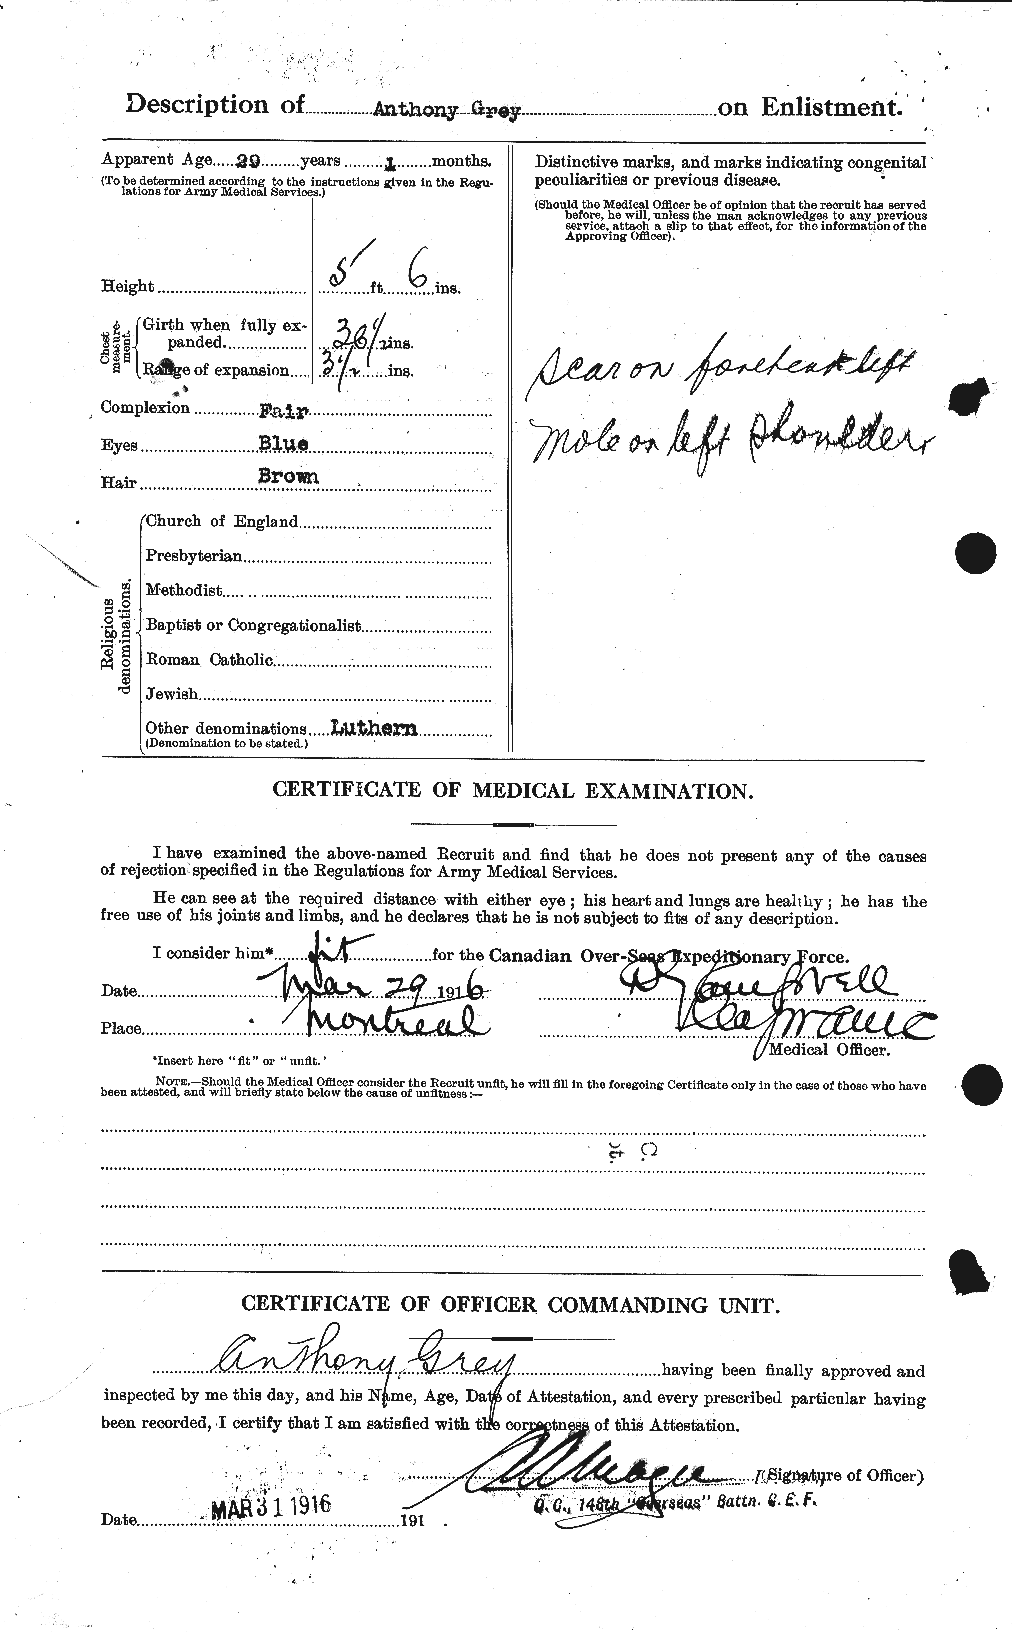 Personnel Records of the First World War - CEF 367042b